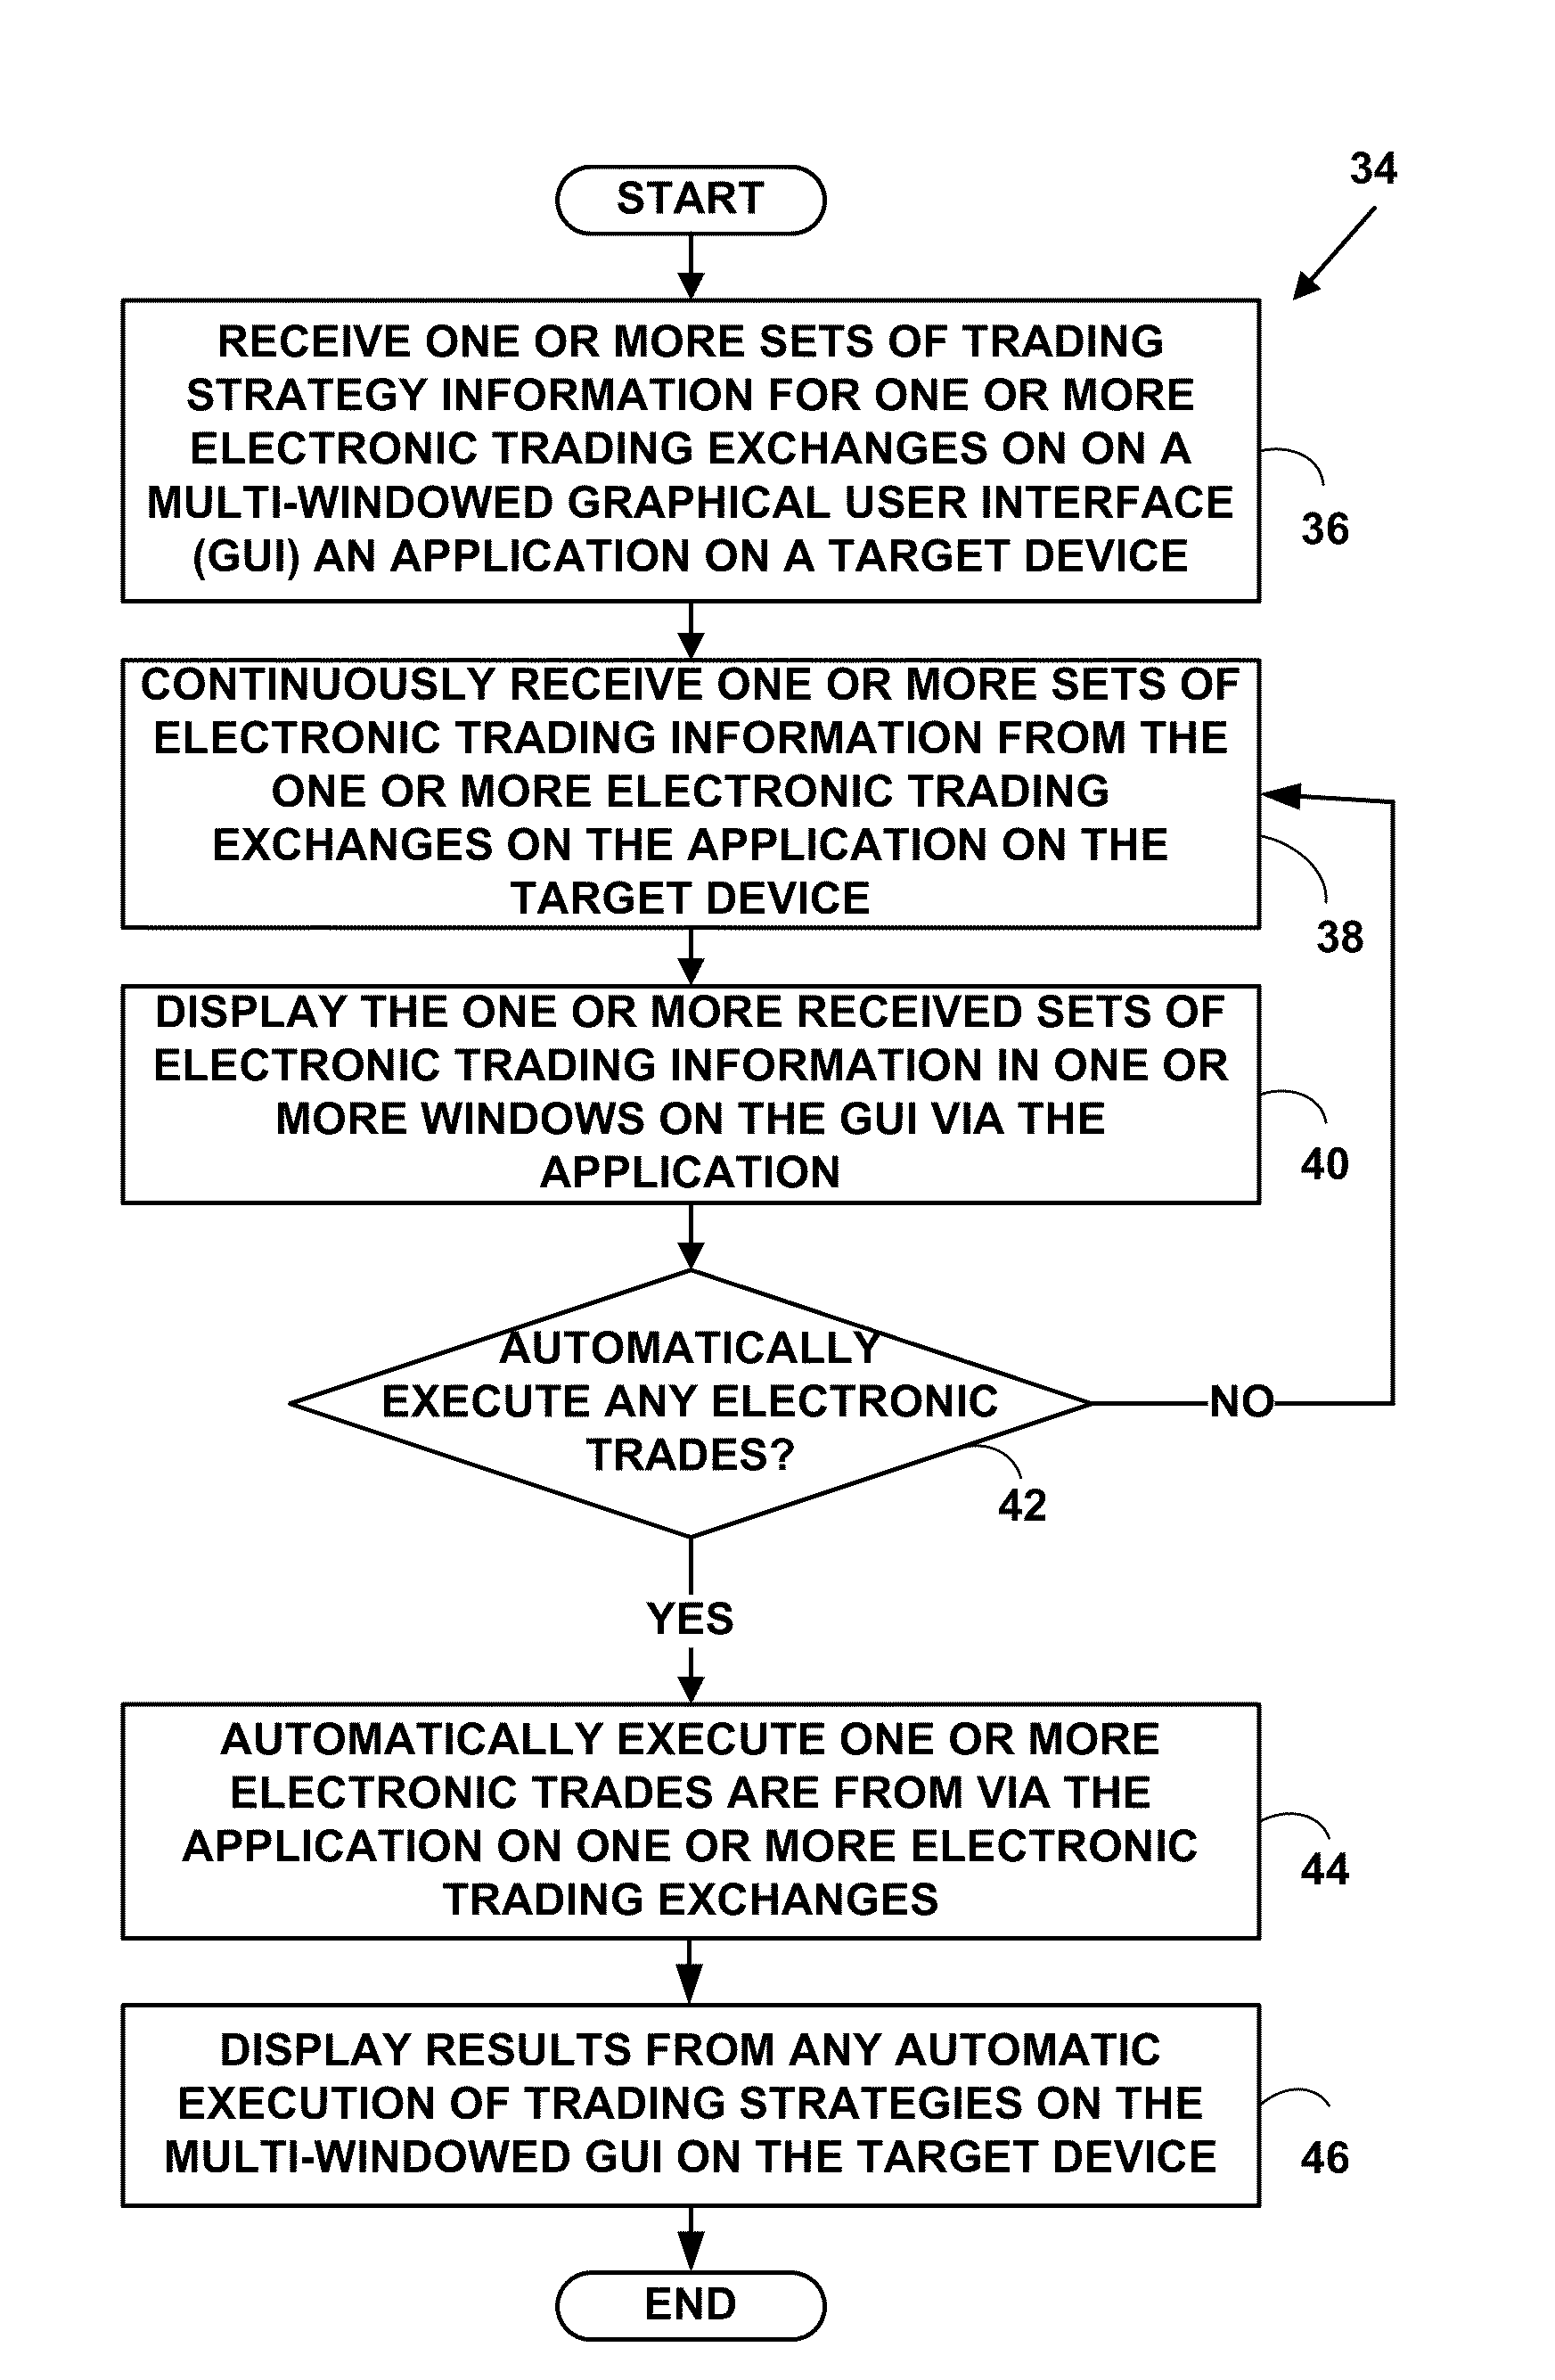 Method and system for automatically inputting, monitoring and trading risk- controlled spreads